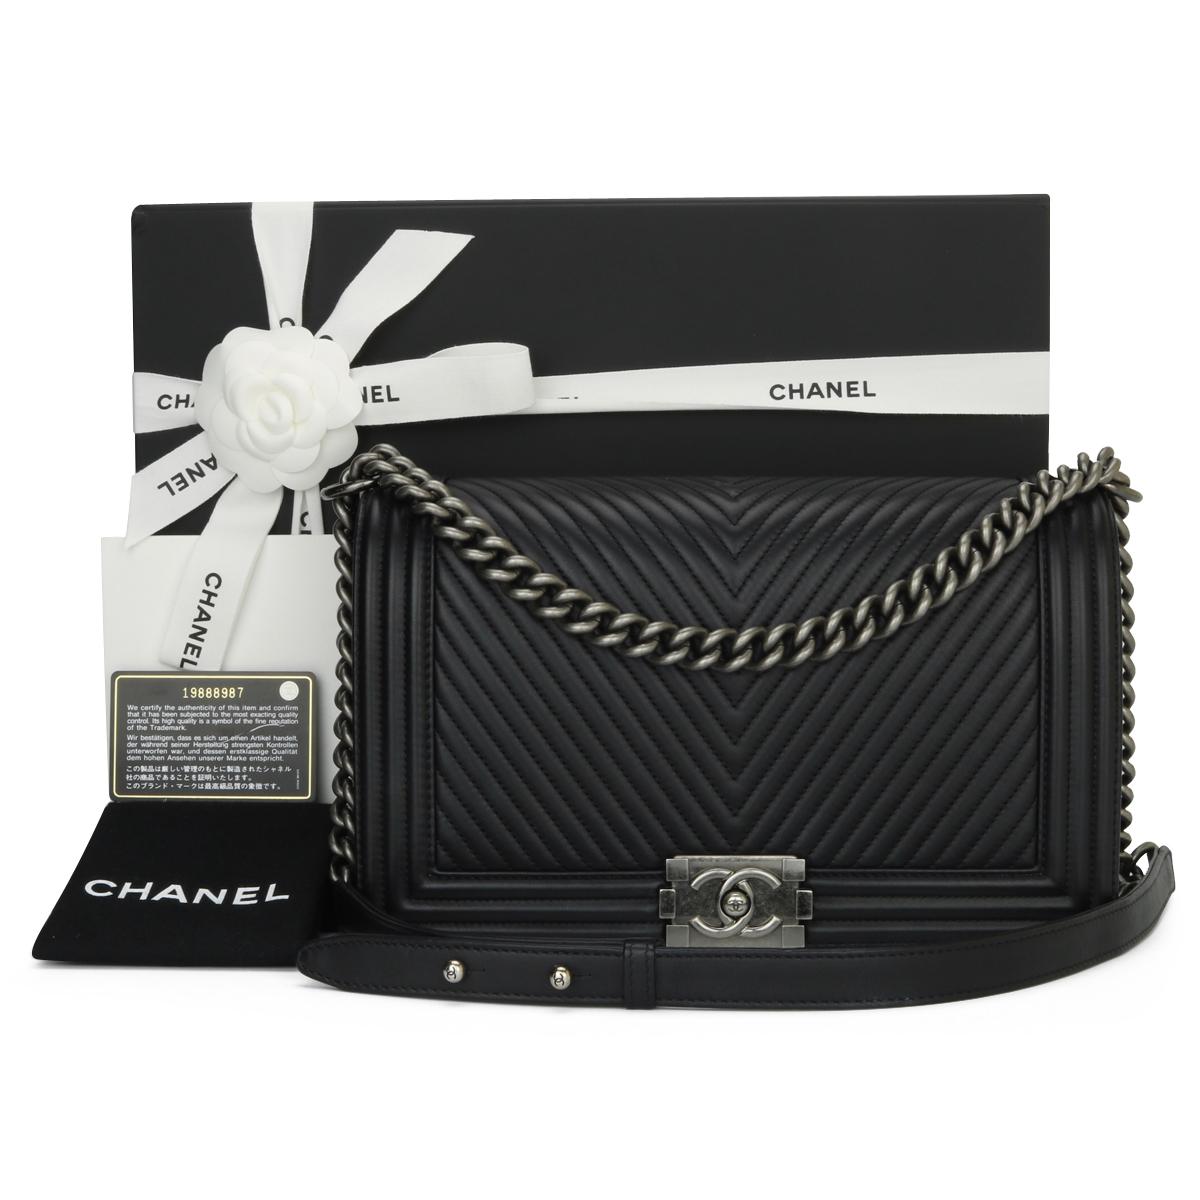 CHANEL New Medium Chevron Boy Bag Black Calfskin with Ruthenium Hardware 2014.

This stunning bag is still in excellent condition, the bag still holds its original shape and the hardware is still very clean and shiny.

- Exterior Condition: